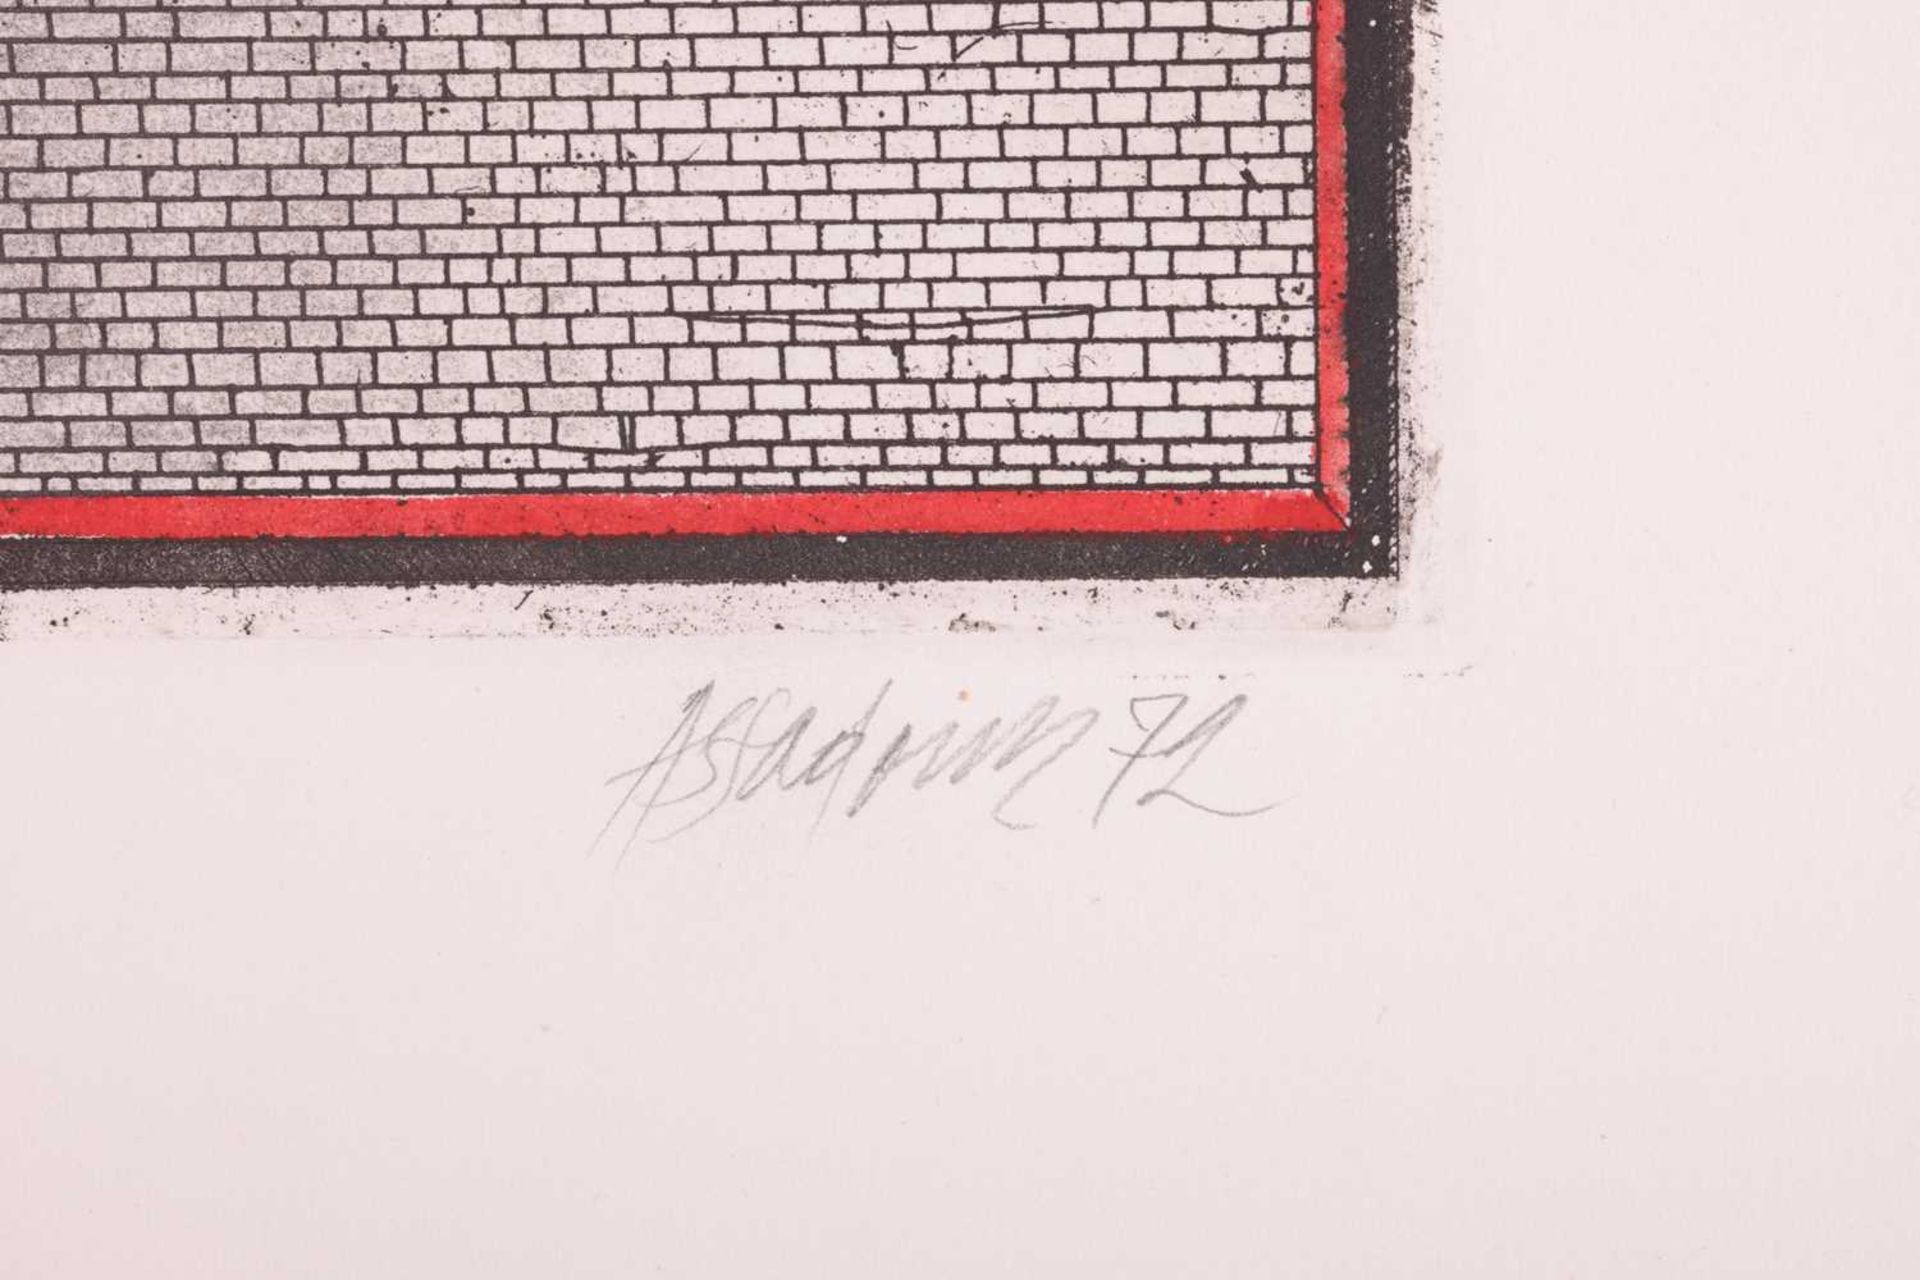 Assadour Bezdikian (Lebanese/French, b.1943), 'Eclipse', signed and dated in pencil 'Assadour 72' an - Image 5 of 11